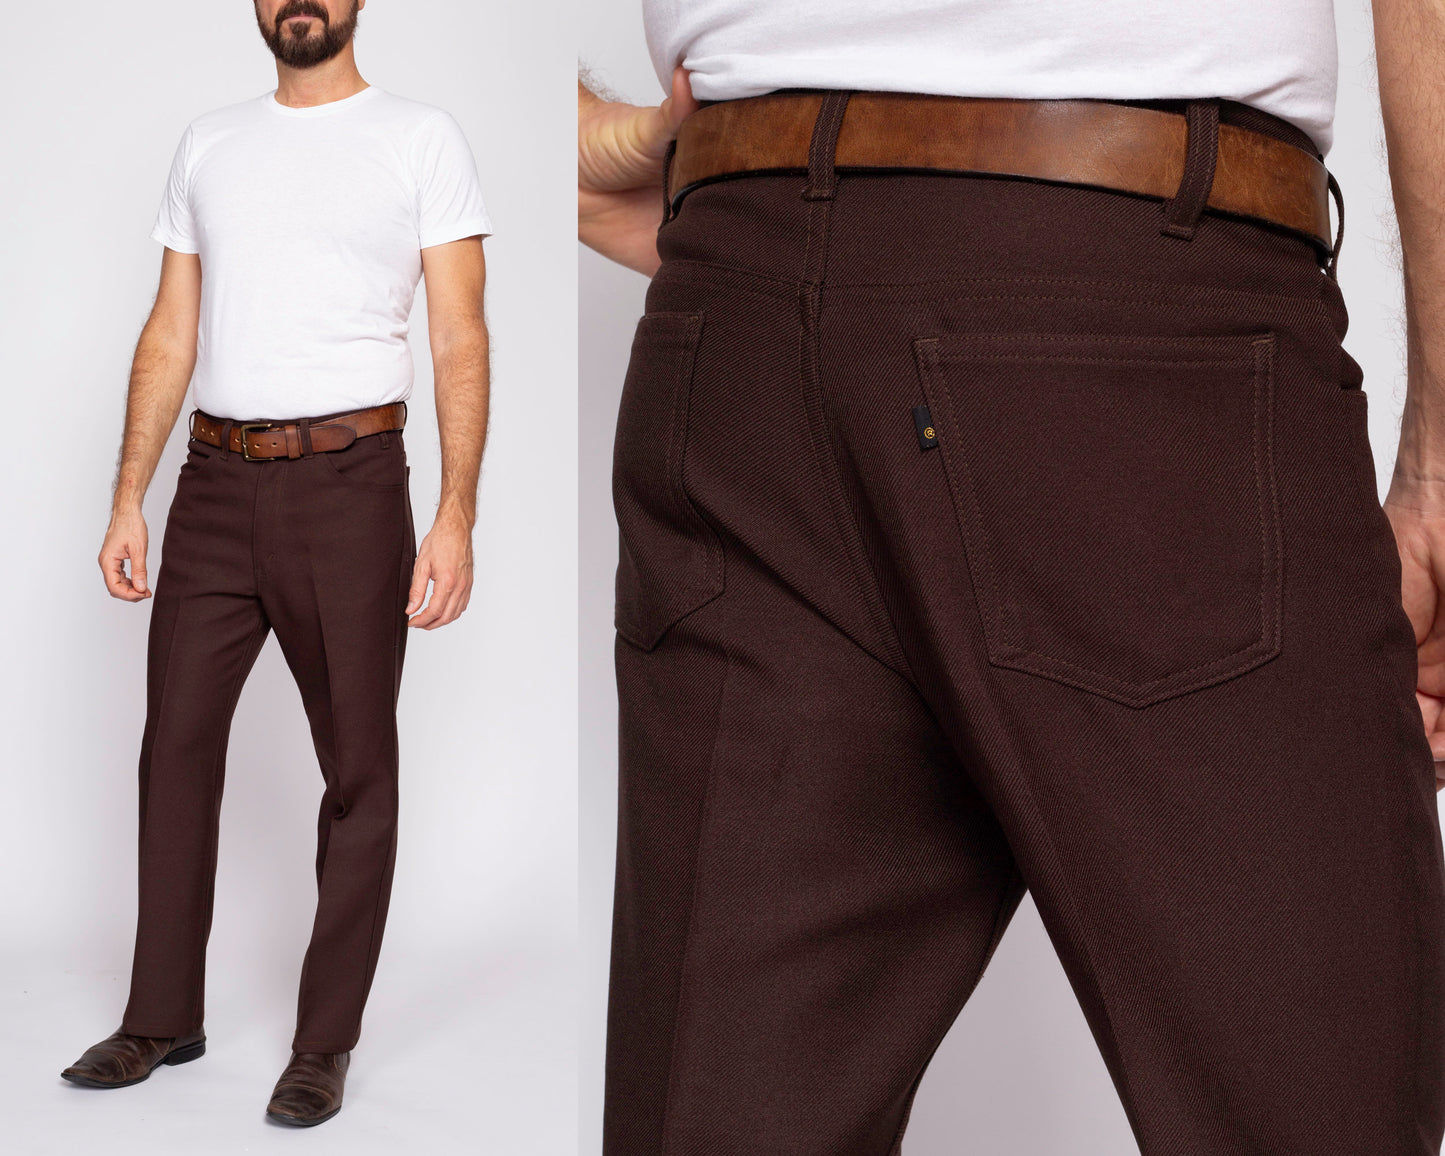 70s Levi's Brown Trousers - 34x32 | Retro Vintage Straight Leg Rockabilly Polyester Pants